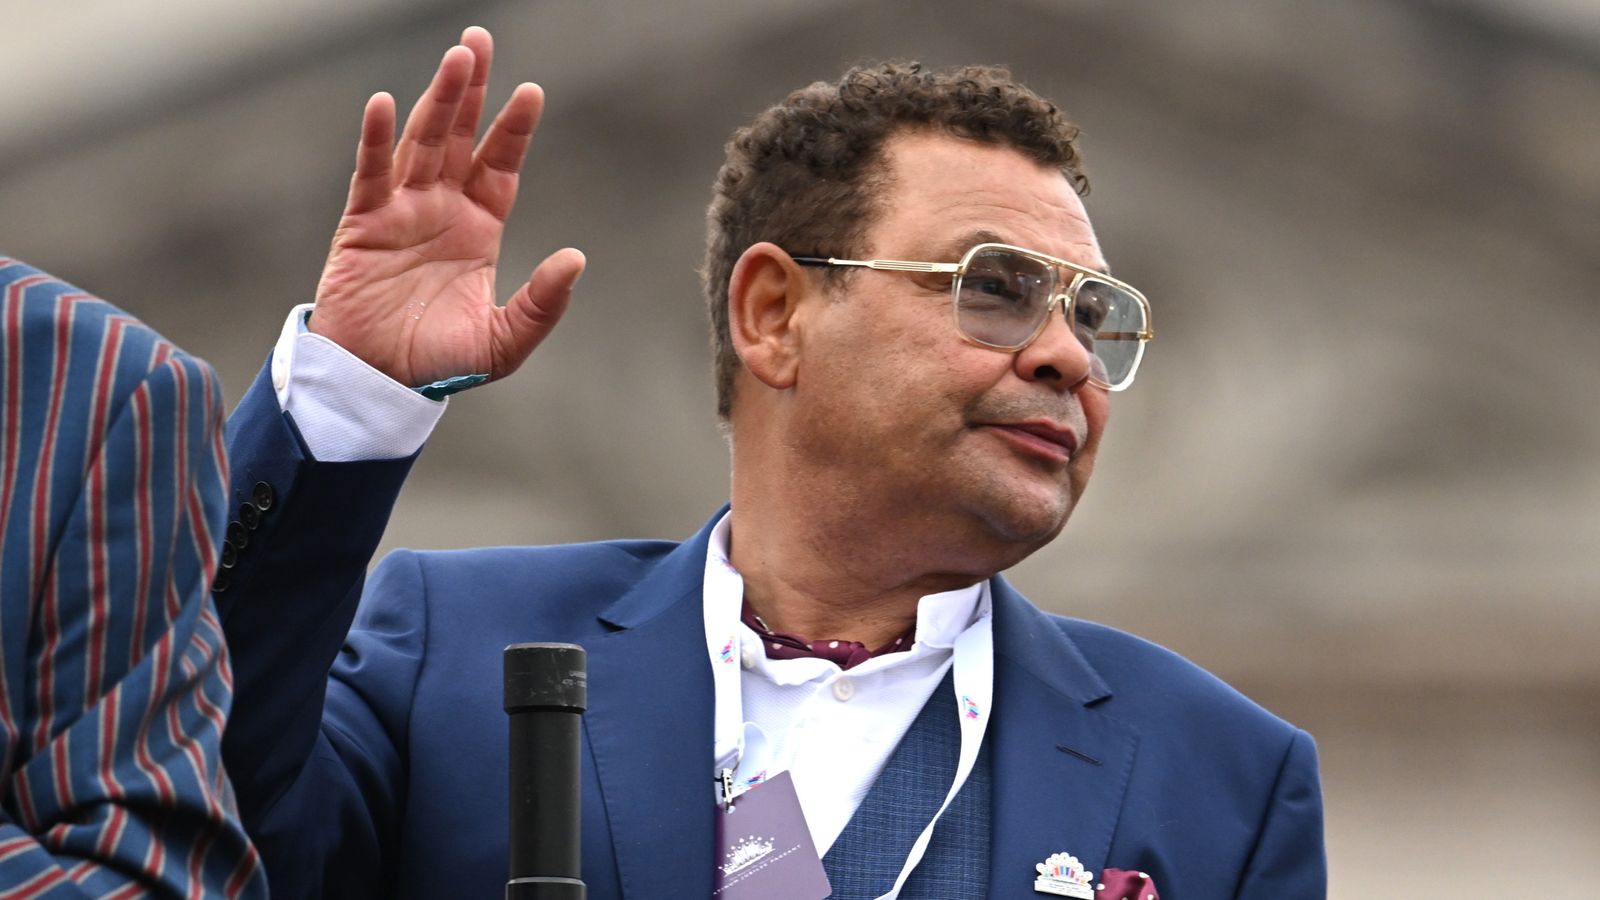 Red Dwarf star Craig Charles rushed to hospital after suffering pains while presenting radio show